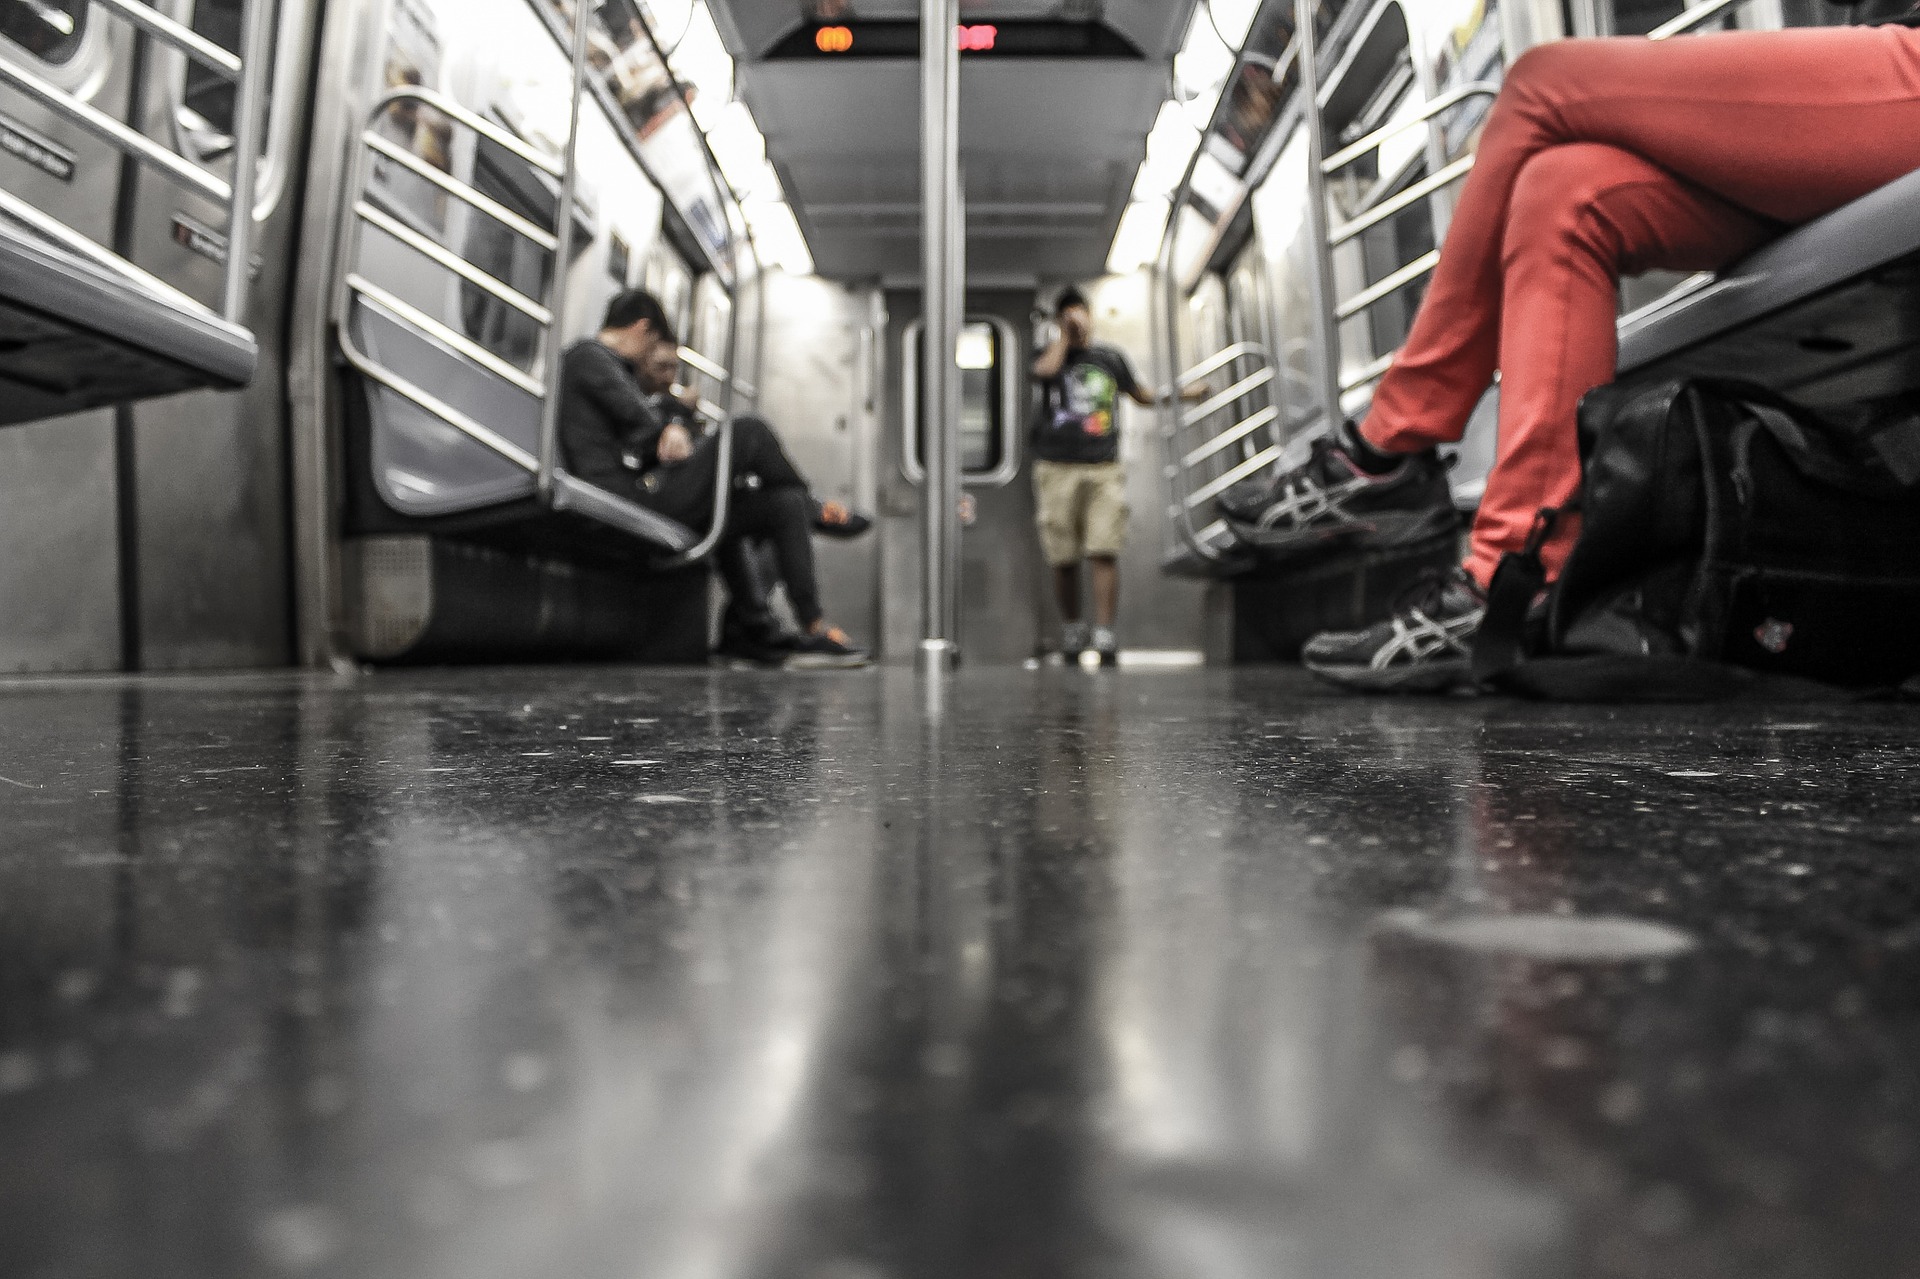 While it's great not having to drive yourself anywhere or worry about parking, riding the subway may be different than you'd expect.